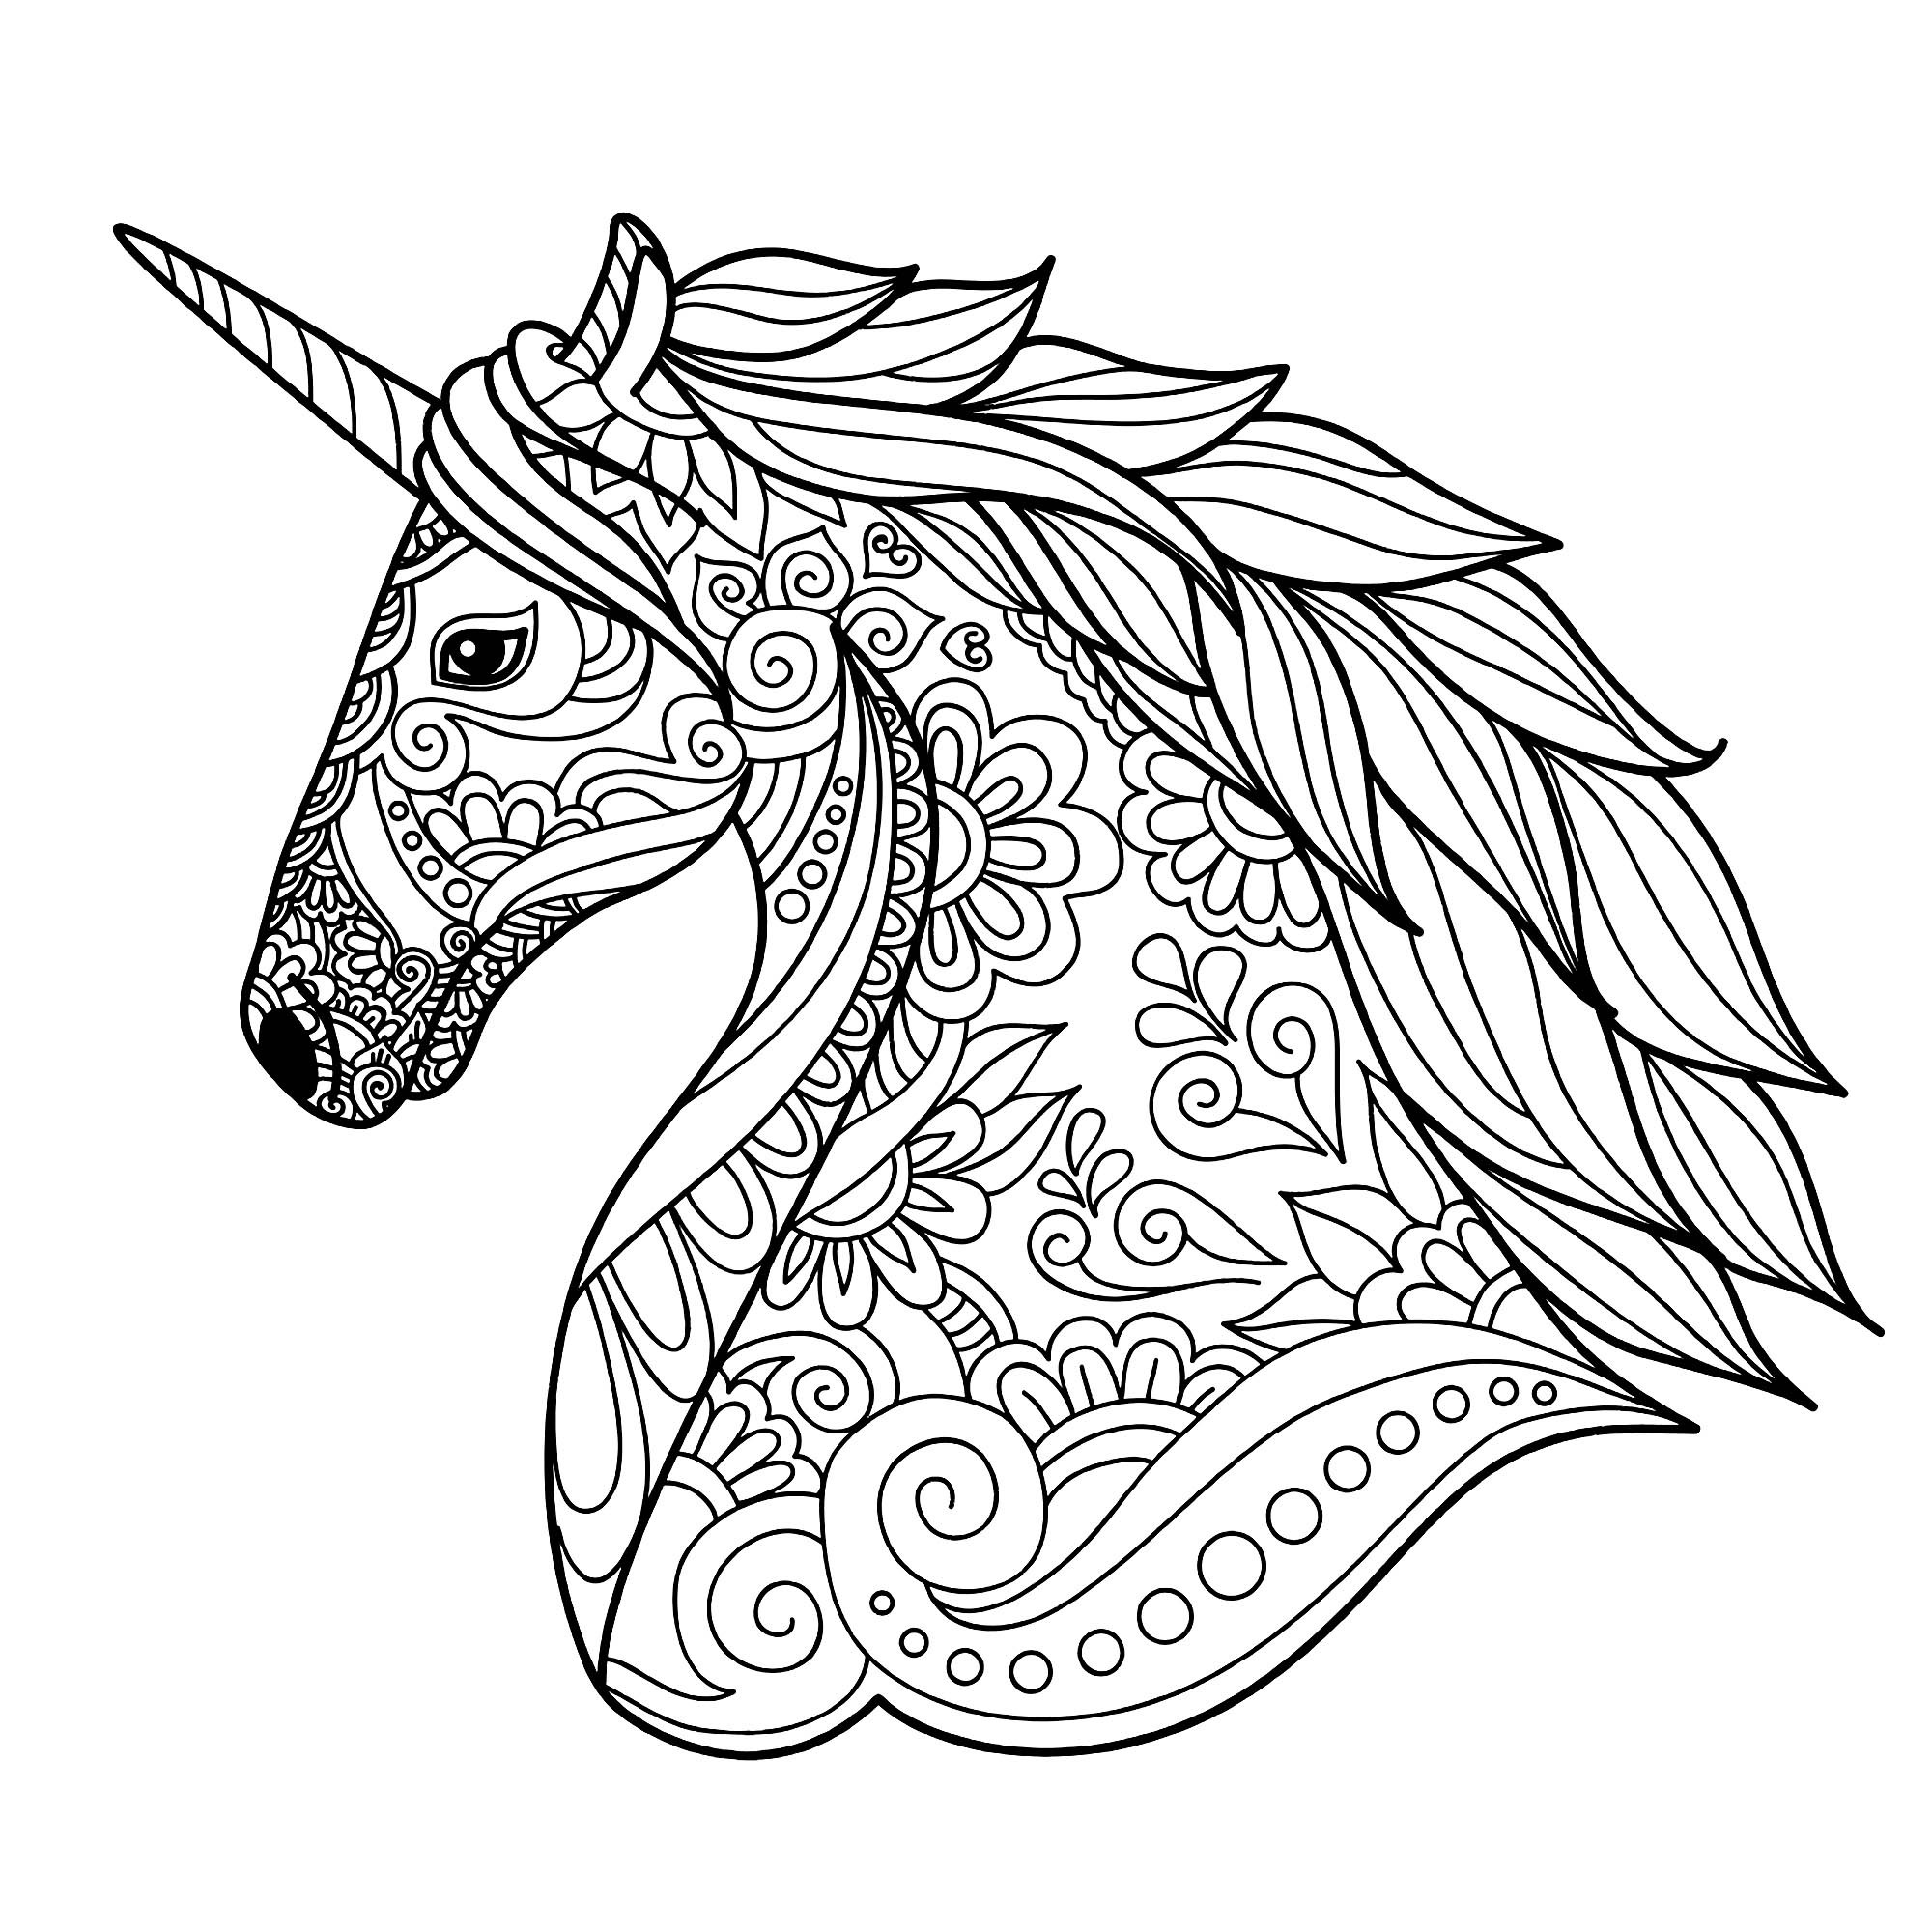 Kids Unicorn Coloring Pages
 Unicorns free to color for children Unicorns Kids